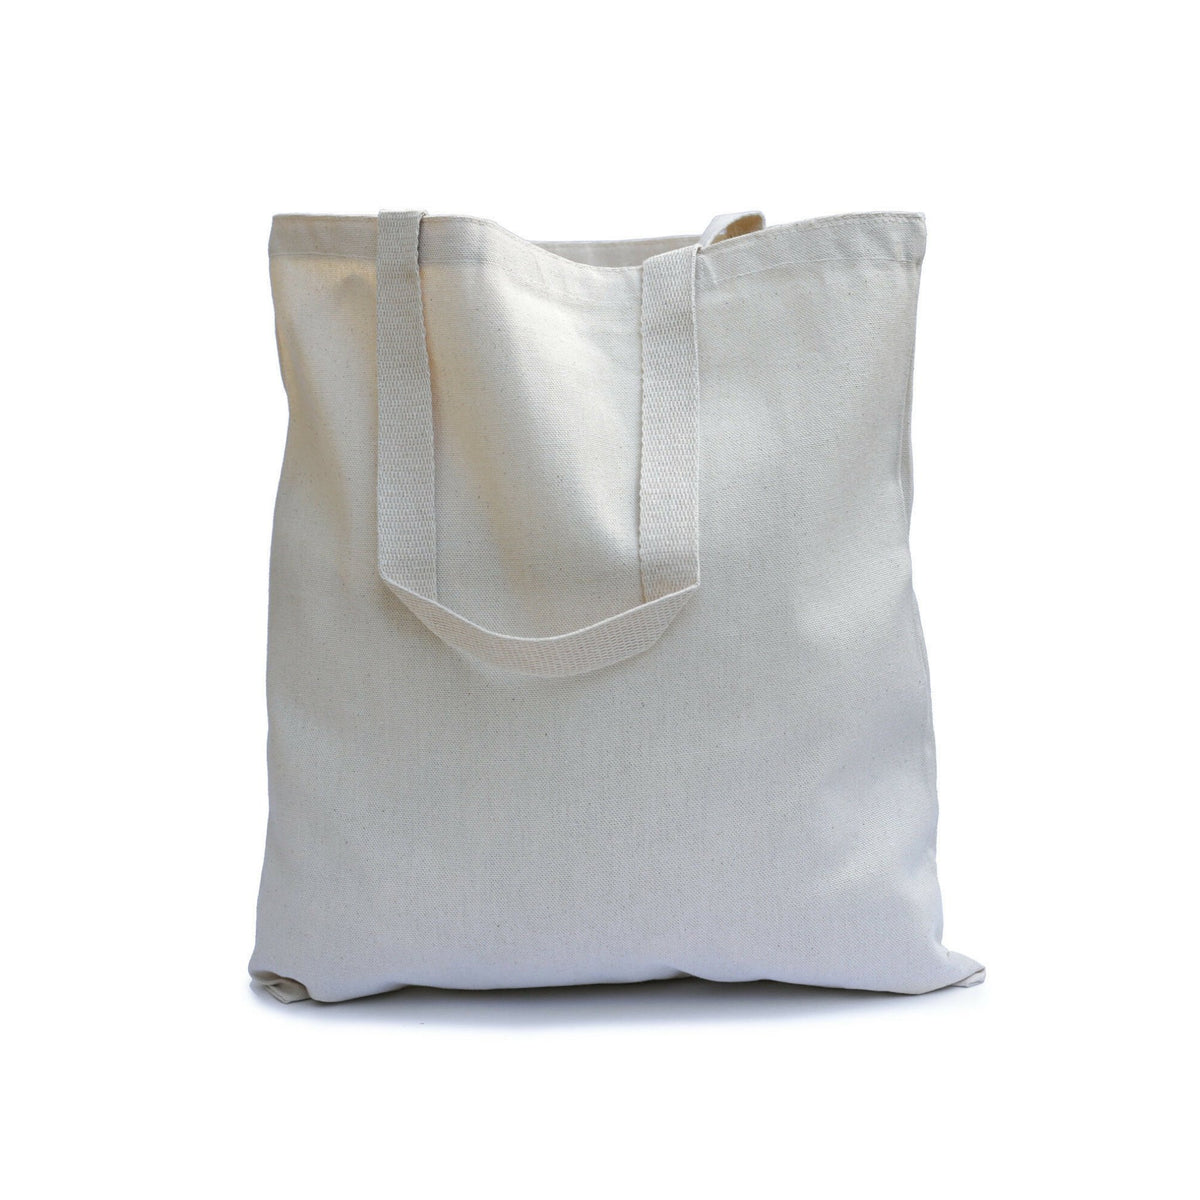 Wholesale Heavy Duty Blank Canvas Tote Bags, Sturdy Totes in Bulk